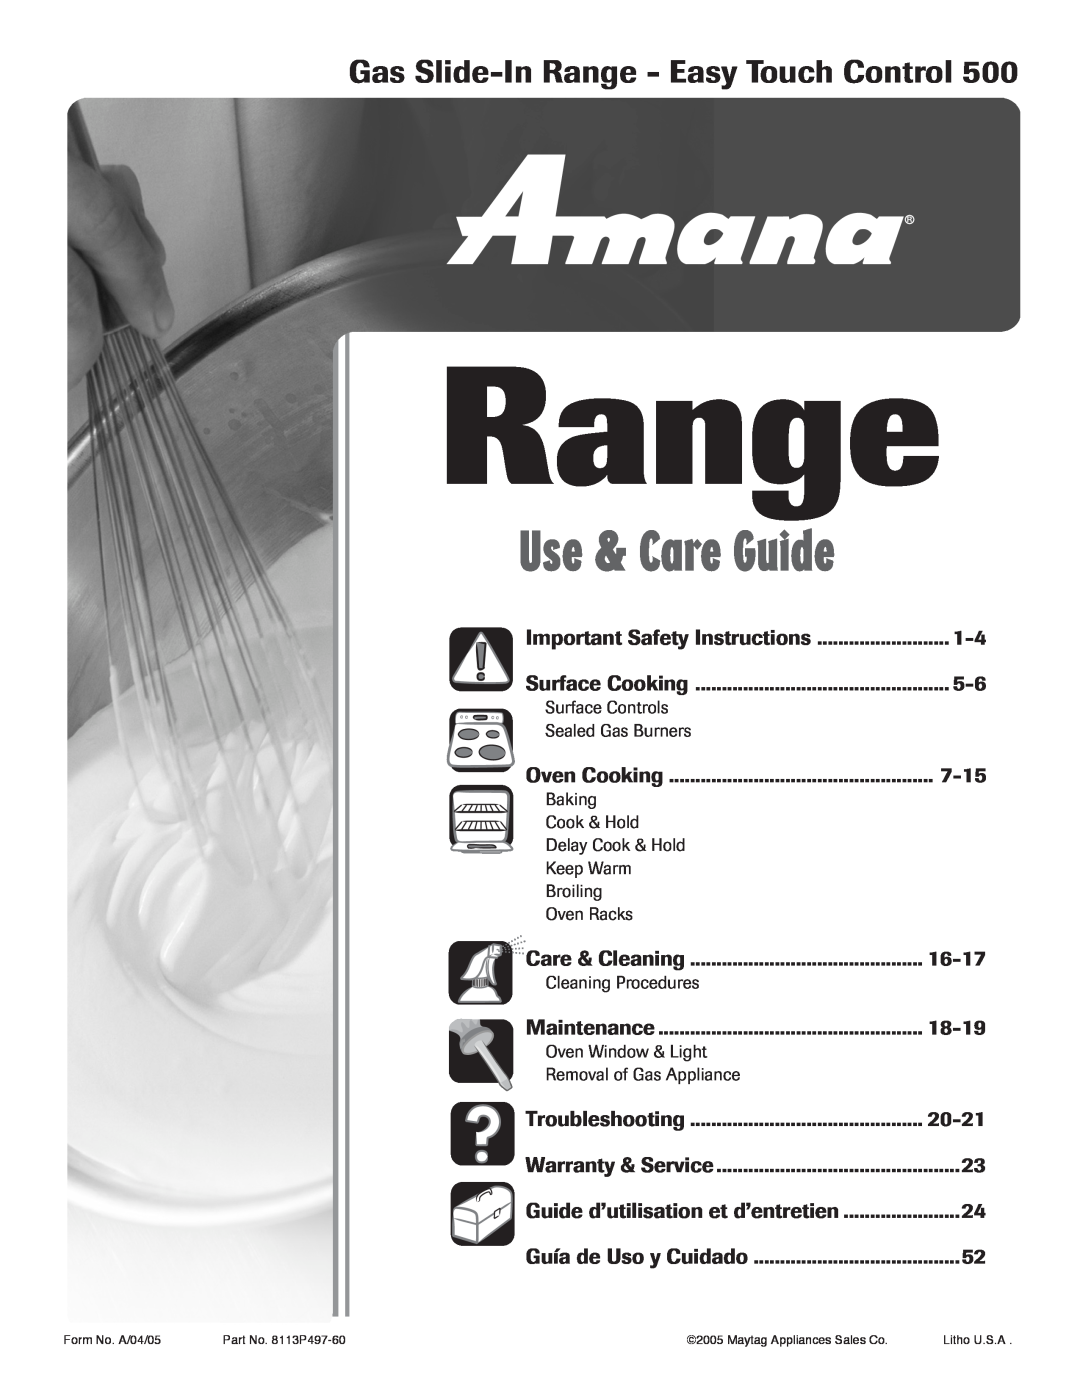 Amana 500 manual Use & Care Guide, Gas Slide-In Range - Easy Touch Control 